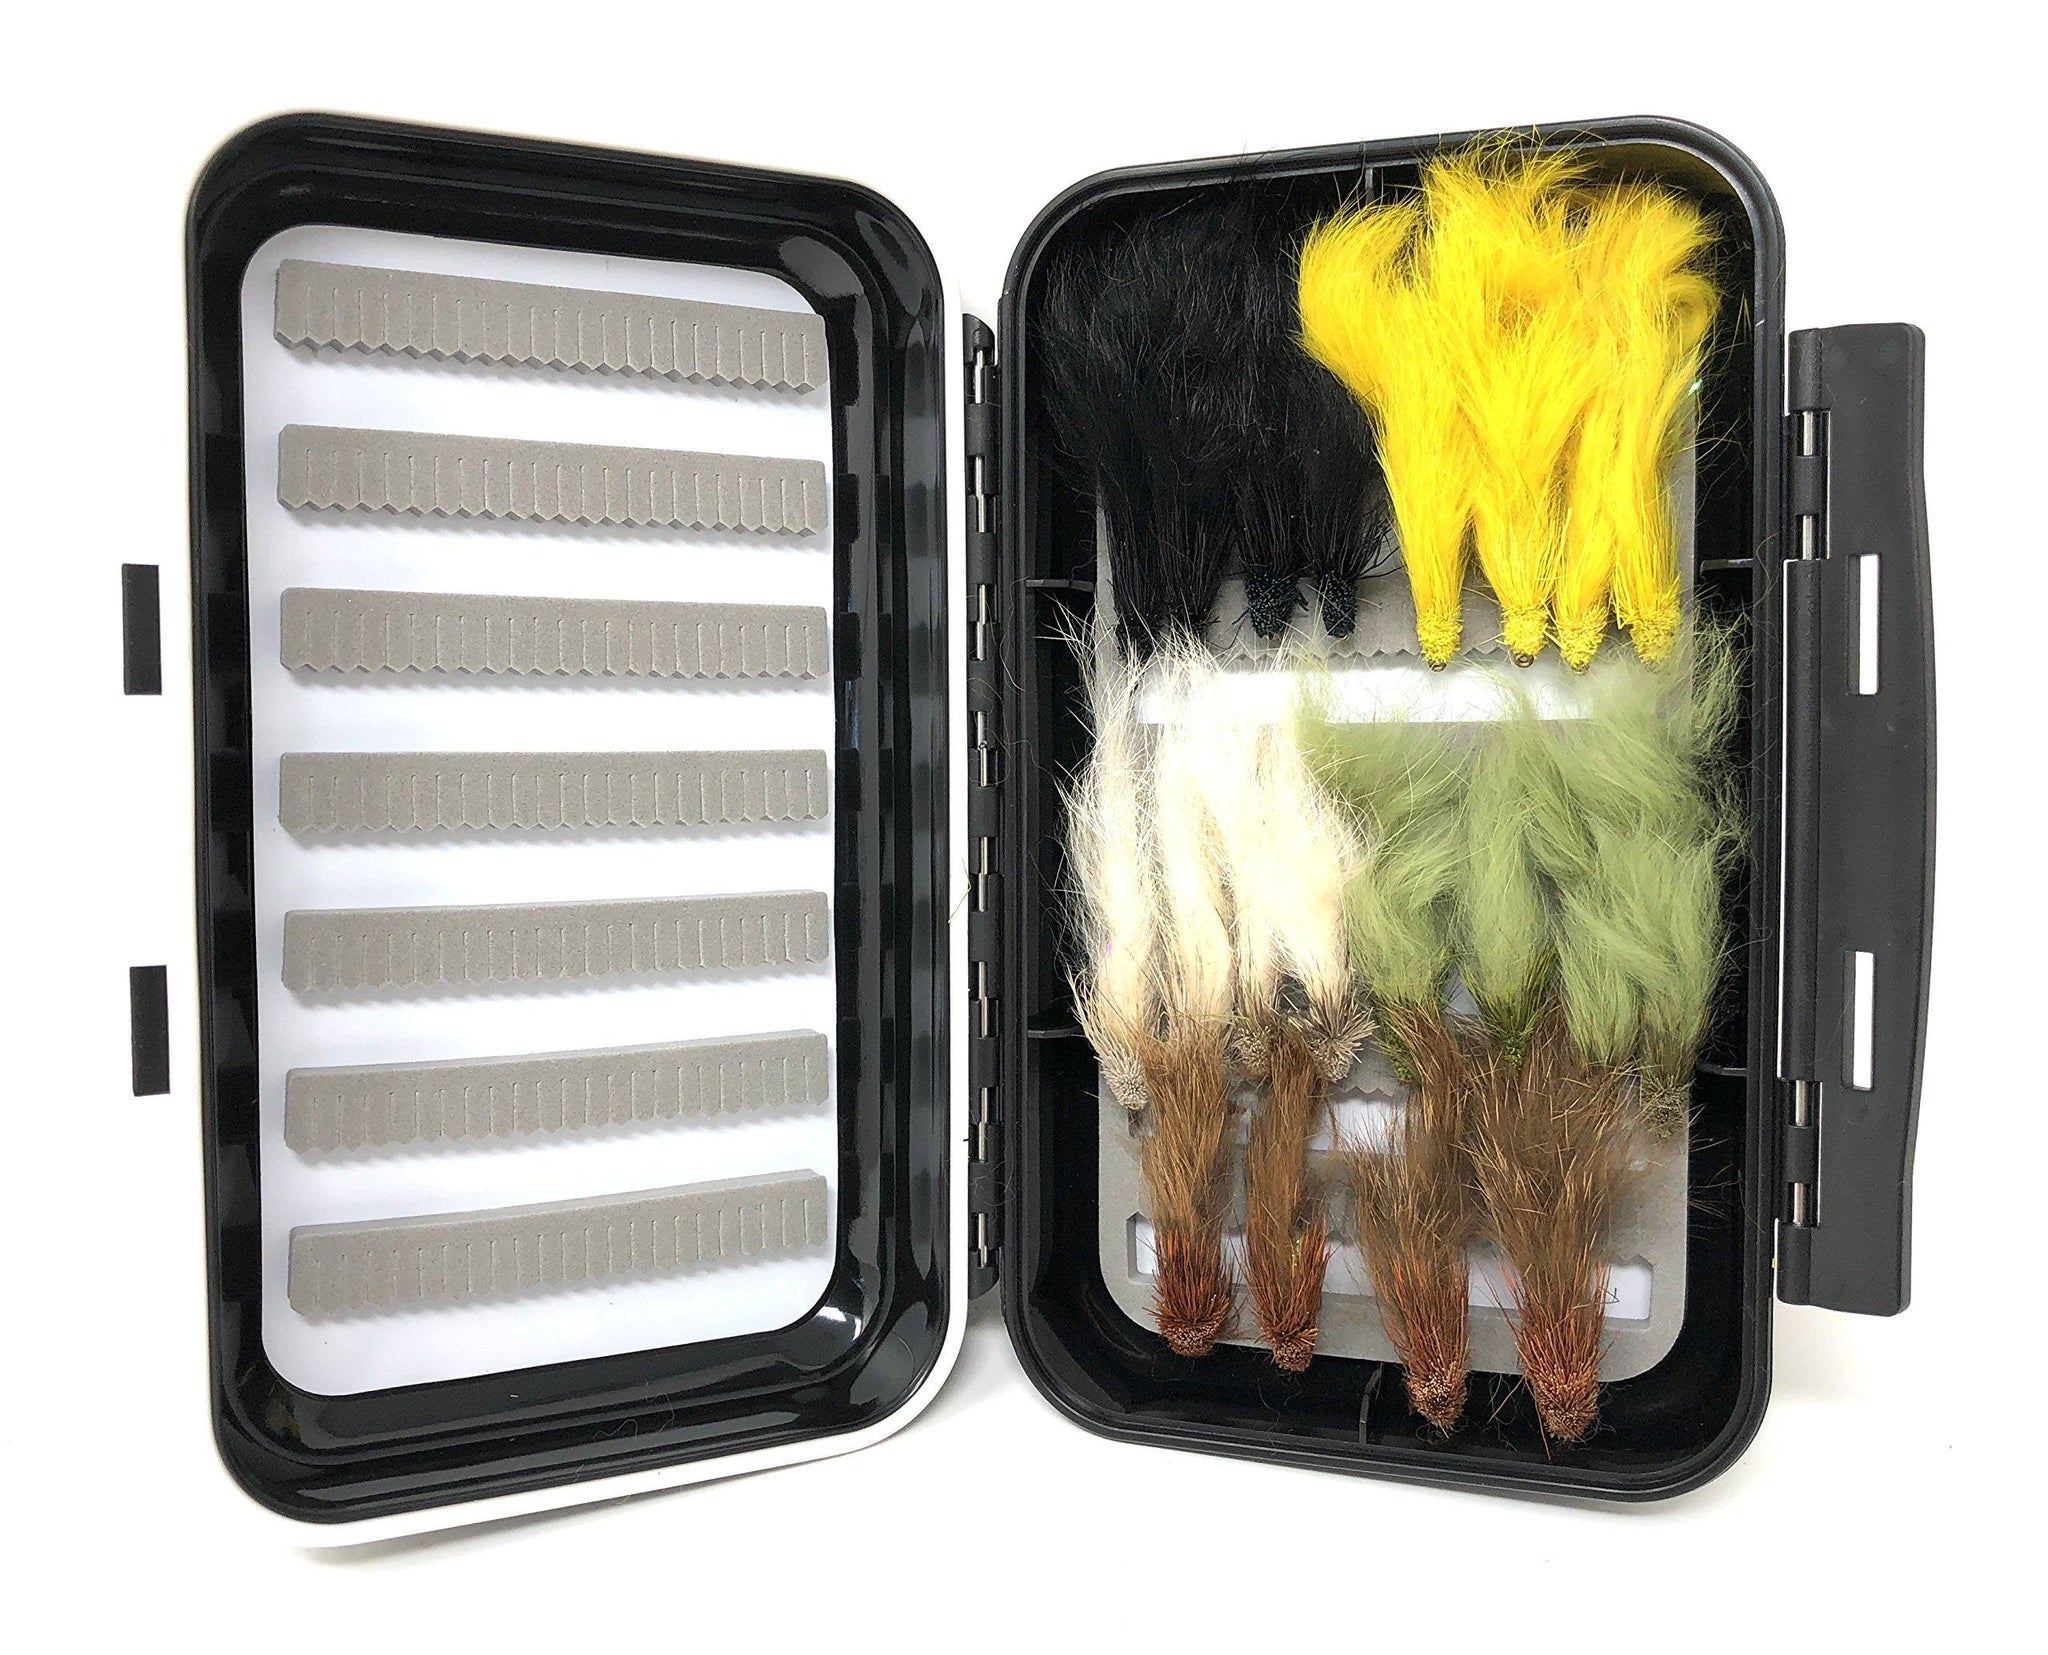 Feeder Creek Fly Fishing Trout Flies - Zonker Streamers (20 Flies with Box)